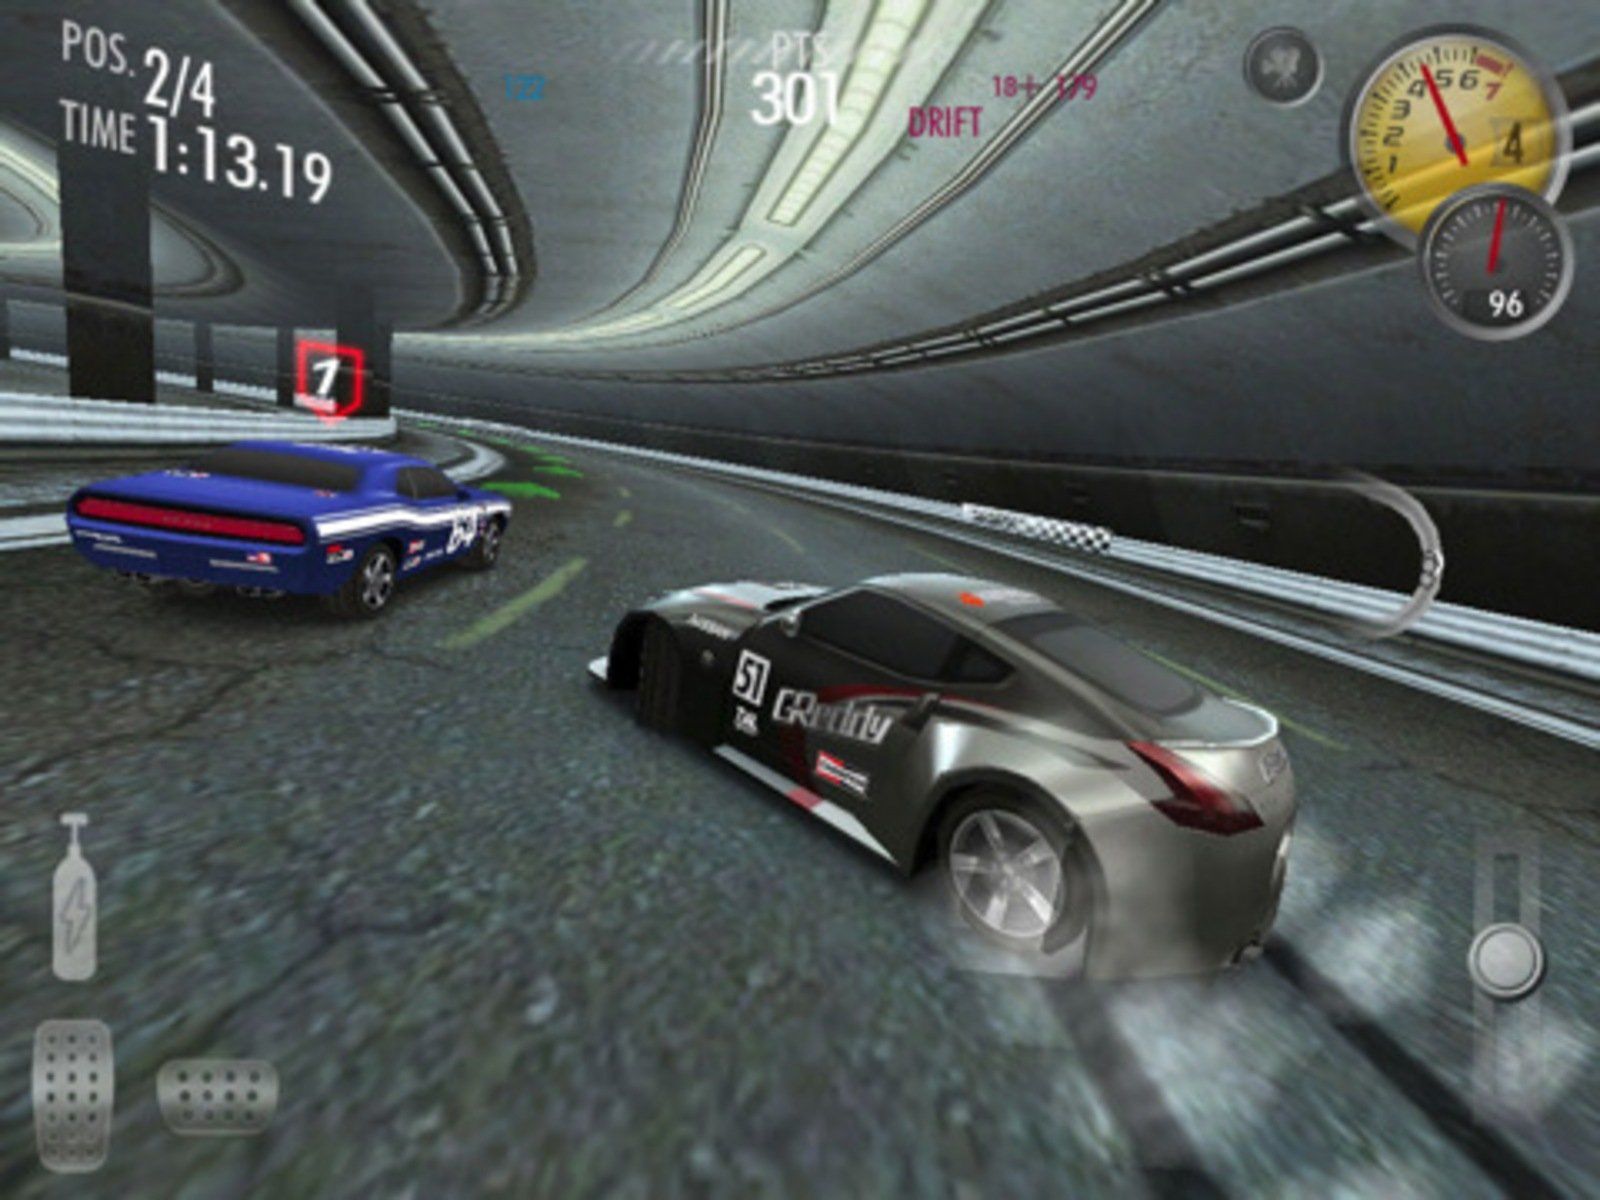 Nfs 2 mobile. Need for Speed Shift 2 андроид. NFS Shift на андроид. Need for Speed Shift 1. Нфс шифт 2011.